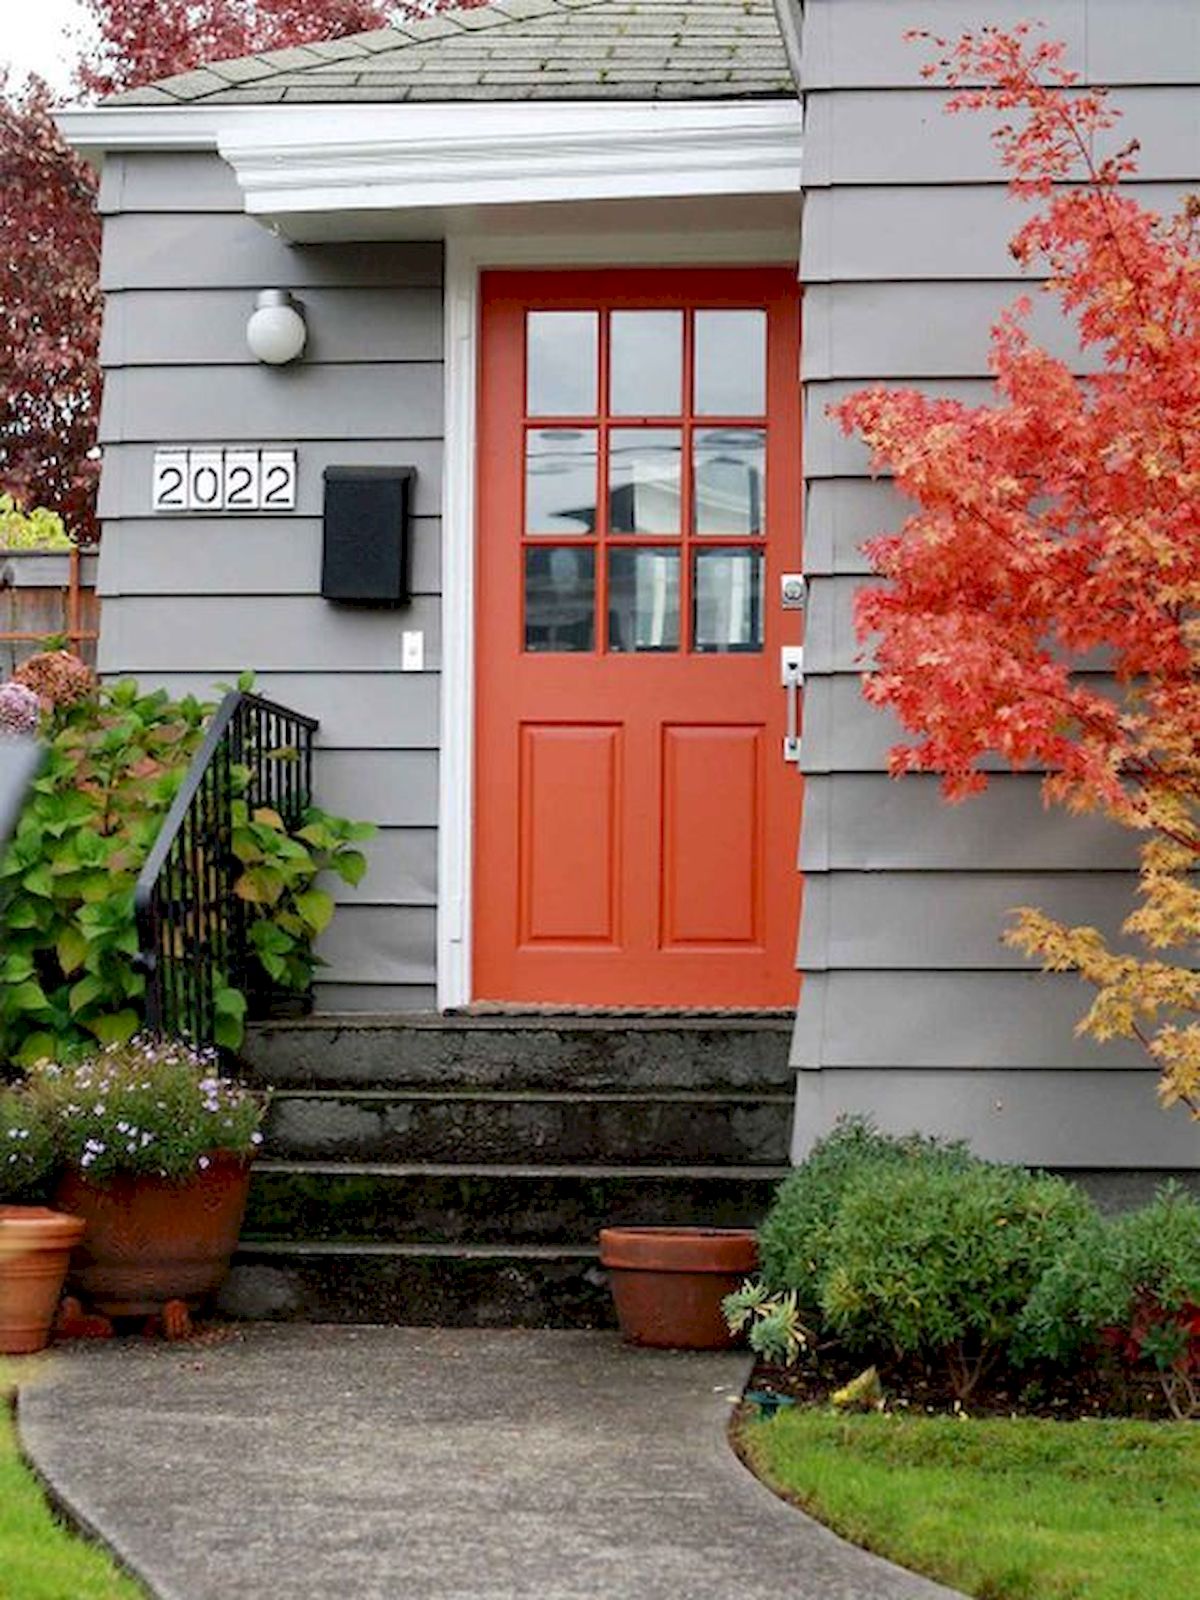 90 Awesome Front Door Colors And Design Ideas (23)